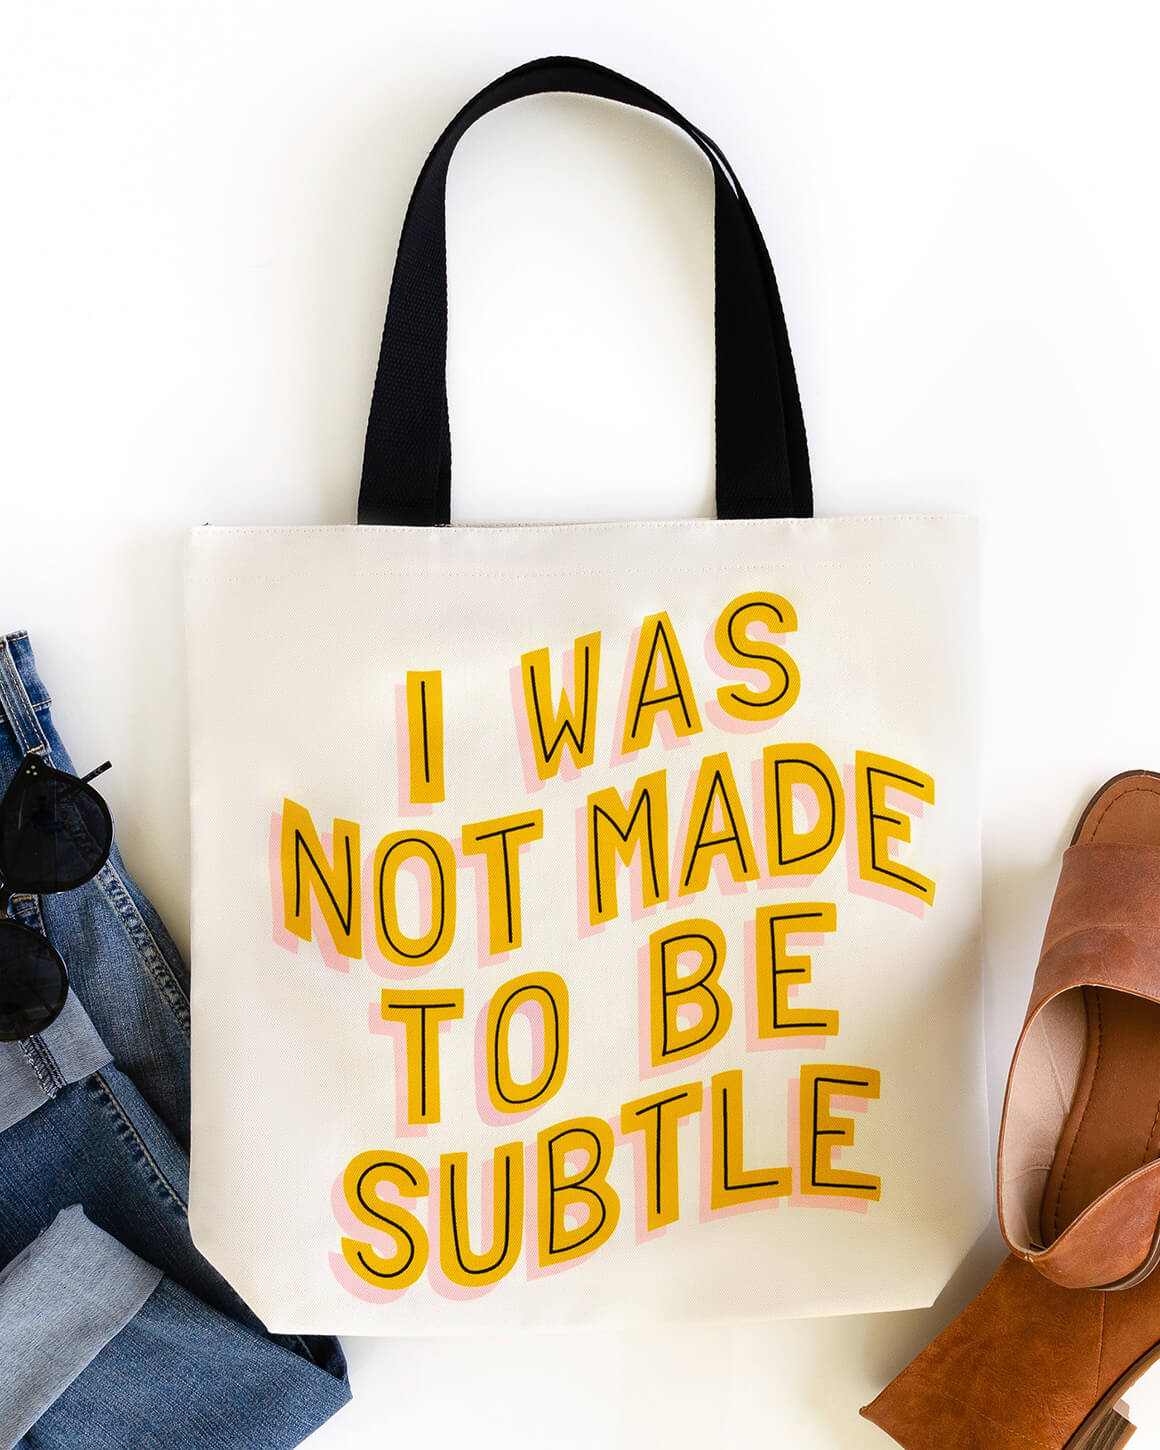 Empowering tote bag for strong women that reads I was not made to be subtle